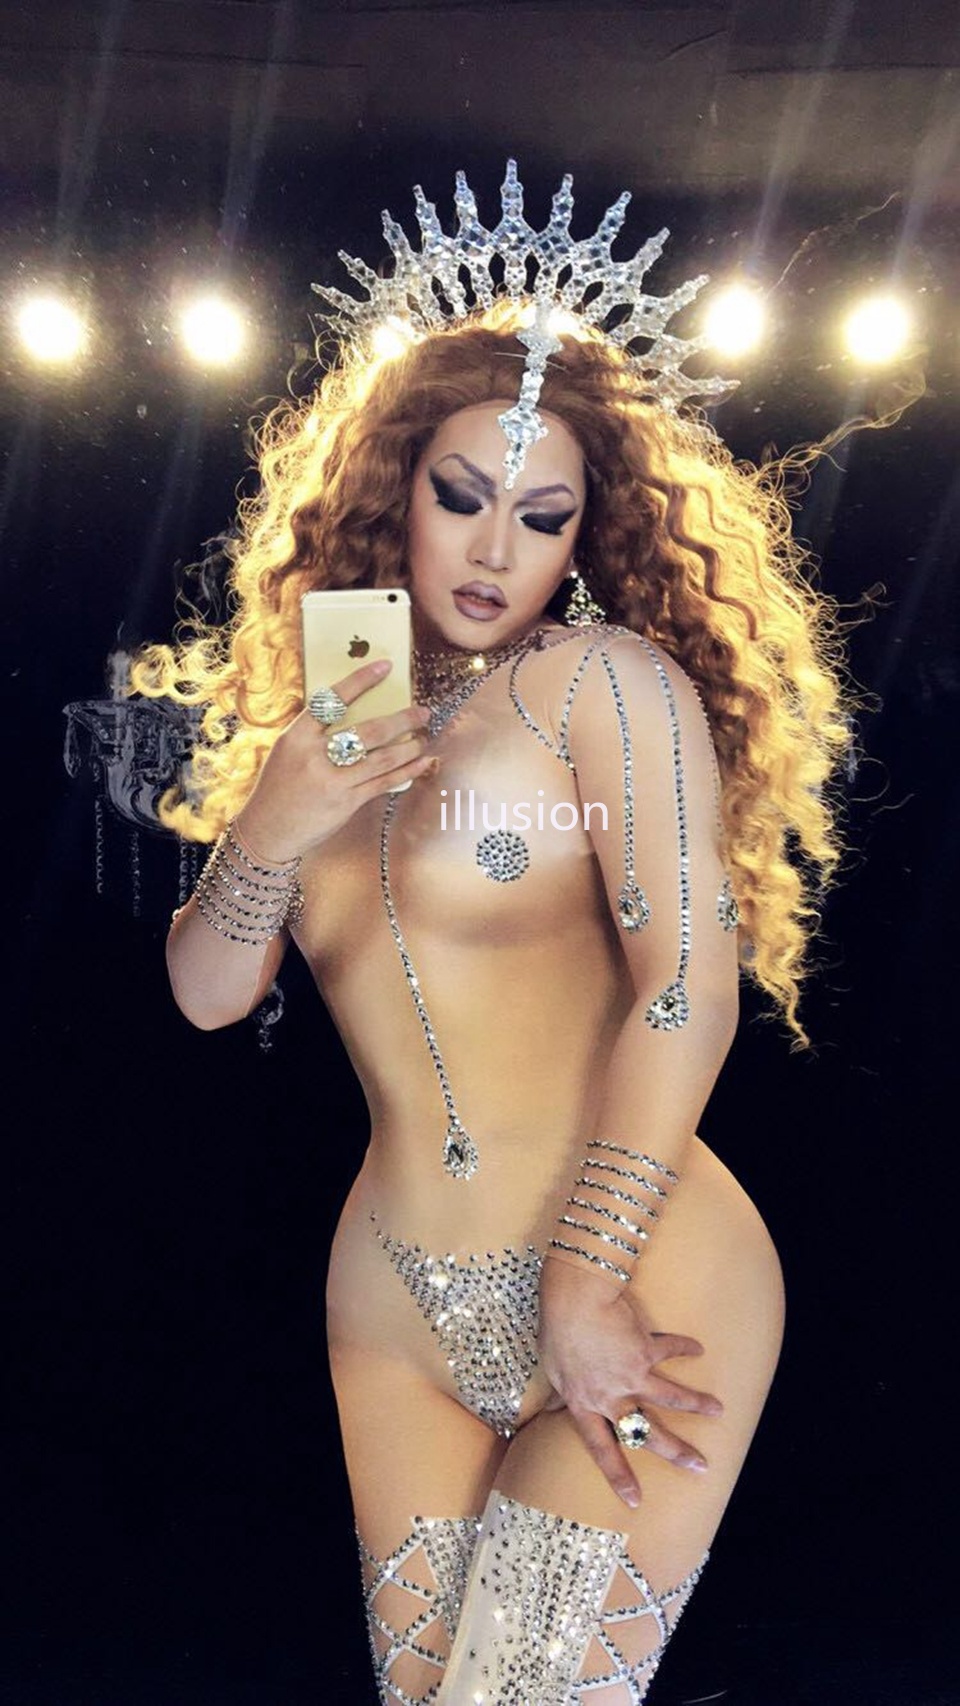 Sexy nude Jumpsuit Women Sparkly Rhinestone Dress Dance Costume Stage Performance Wear Female Singer One Piece Nightclub Outfit